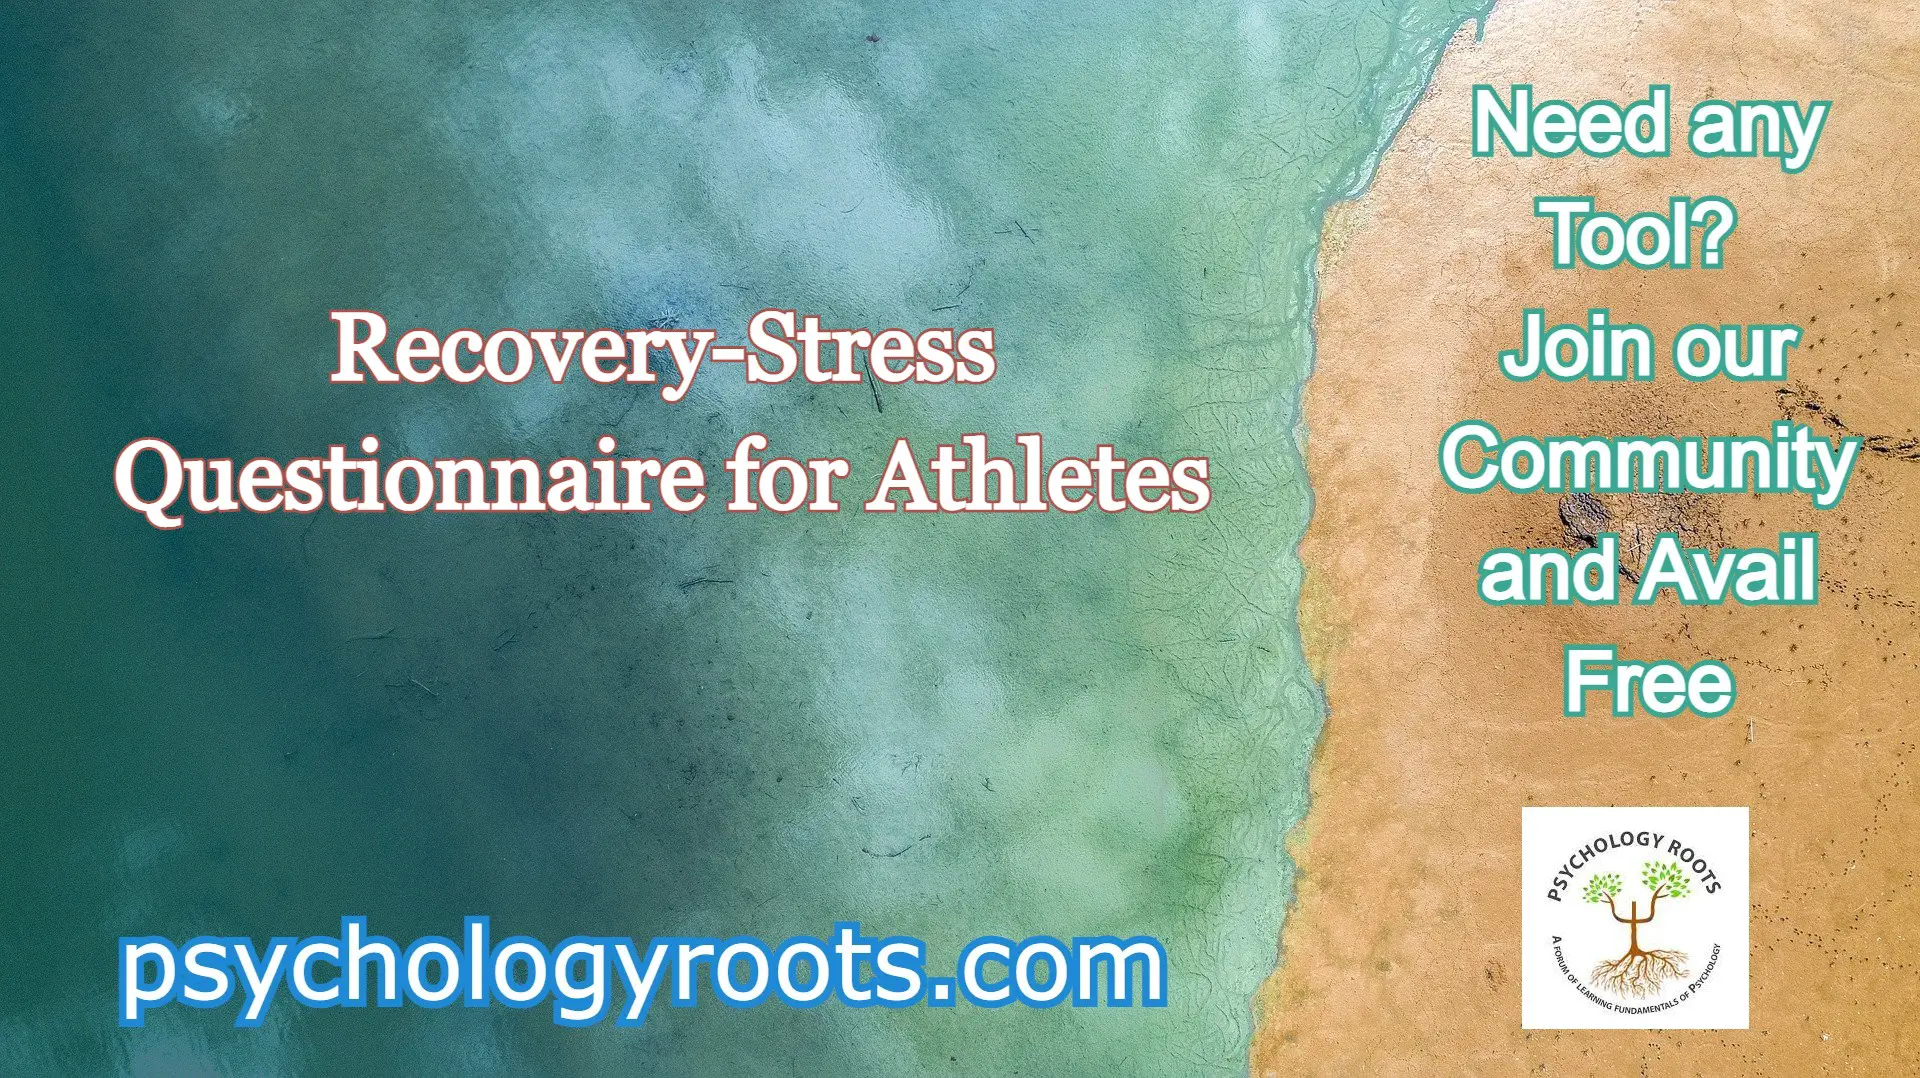 Recovery-Stress Questionnaire for Athletes